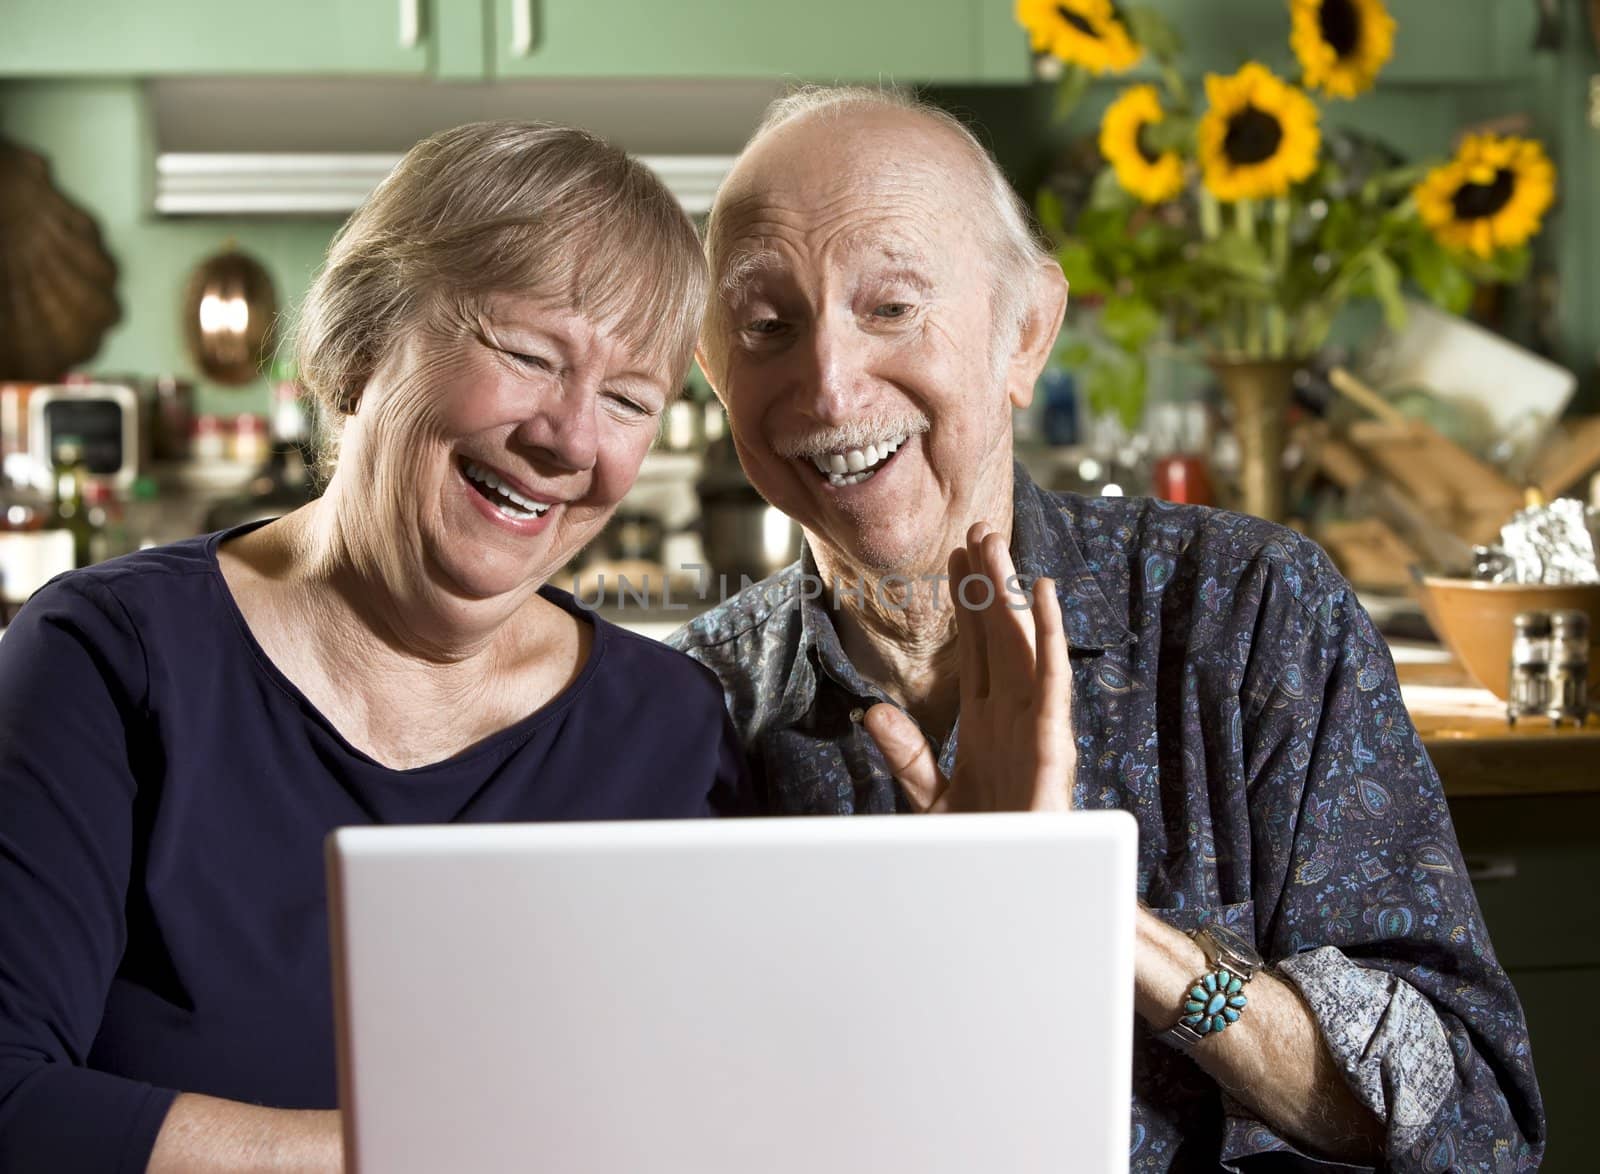 Smiling Senior Couple with a Laptop Computer by Creatista